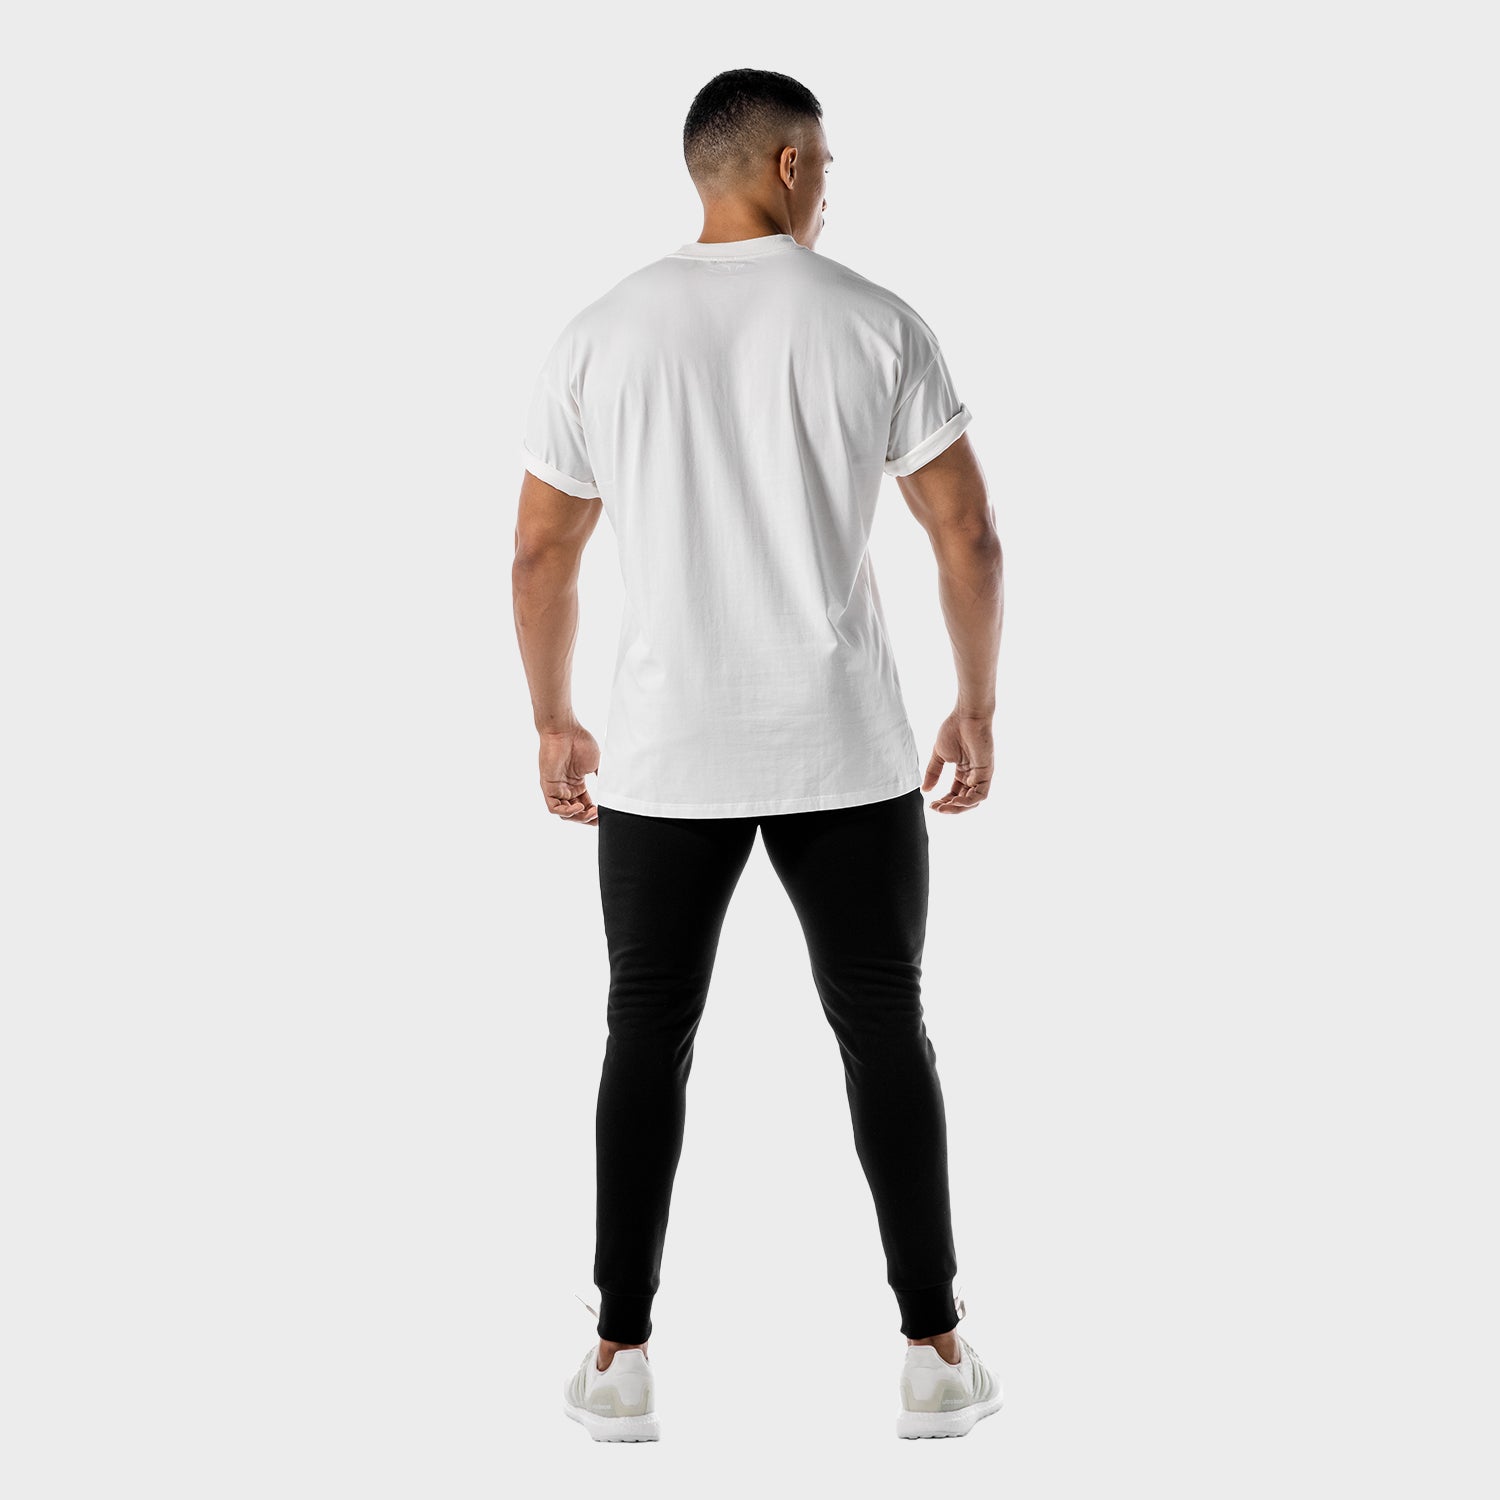 squatwolf-gym-t-shirts-for-women-iconic-oversize-tee-white-workout-clothes